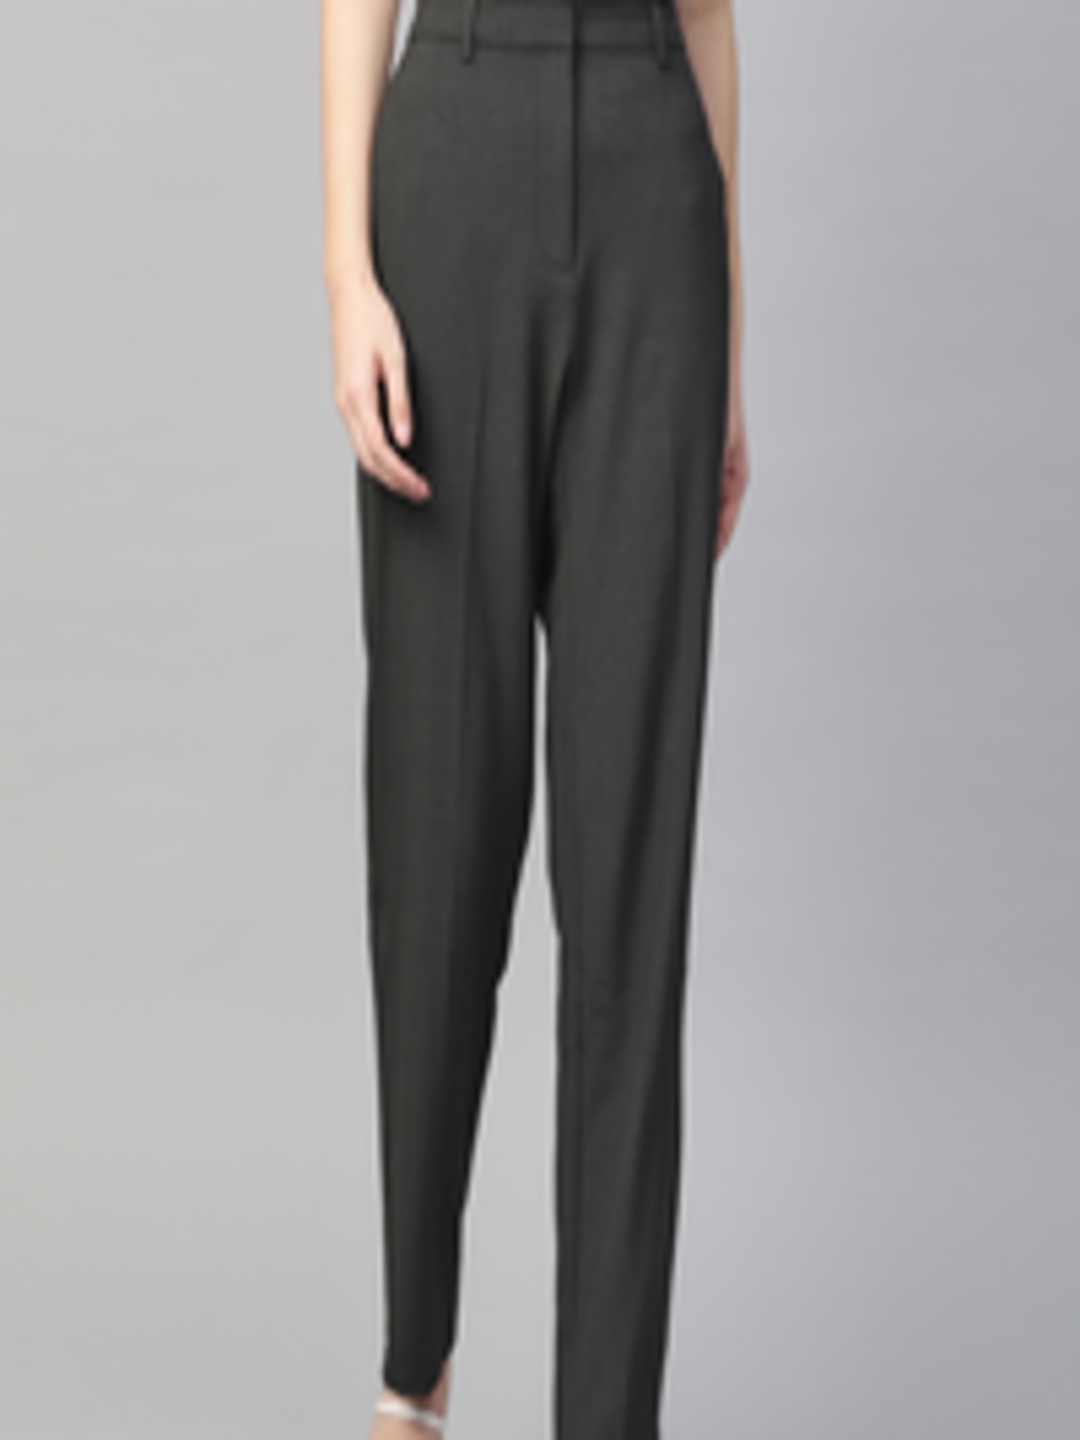 Buy Marks & Spencer Women Charcoal Grey Straight Fit Formal Trousers ...